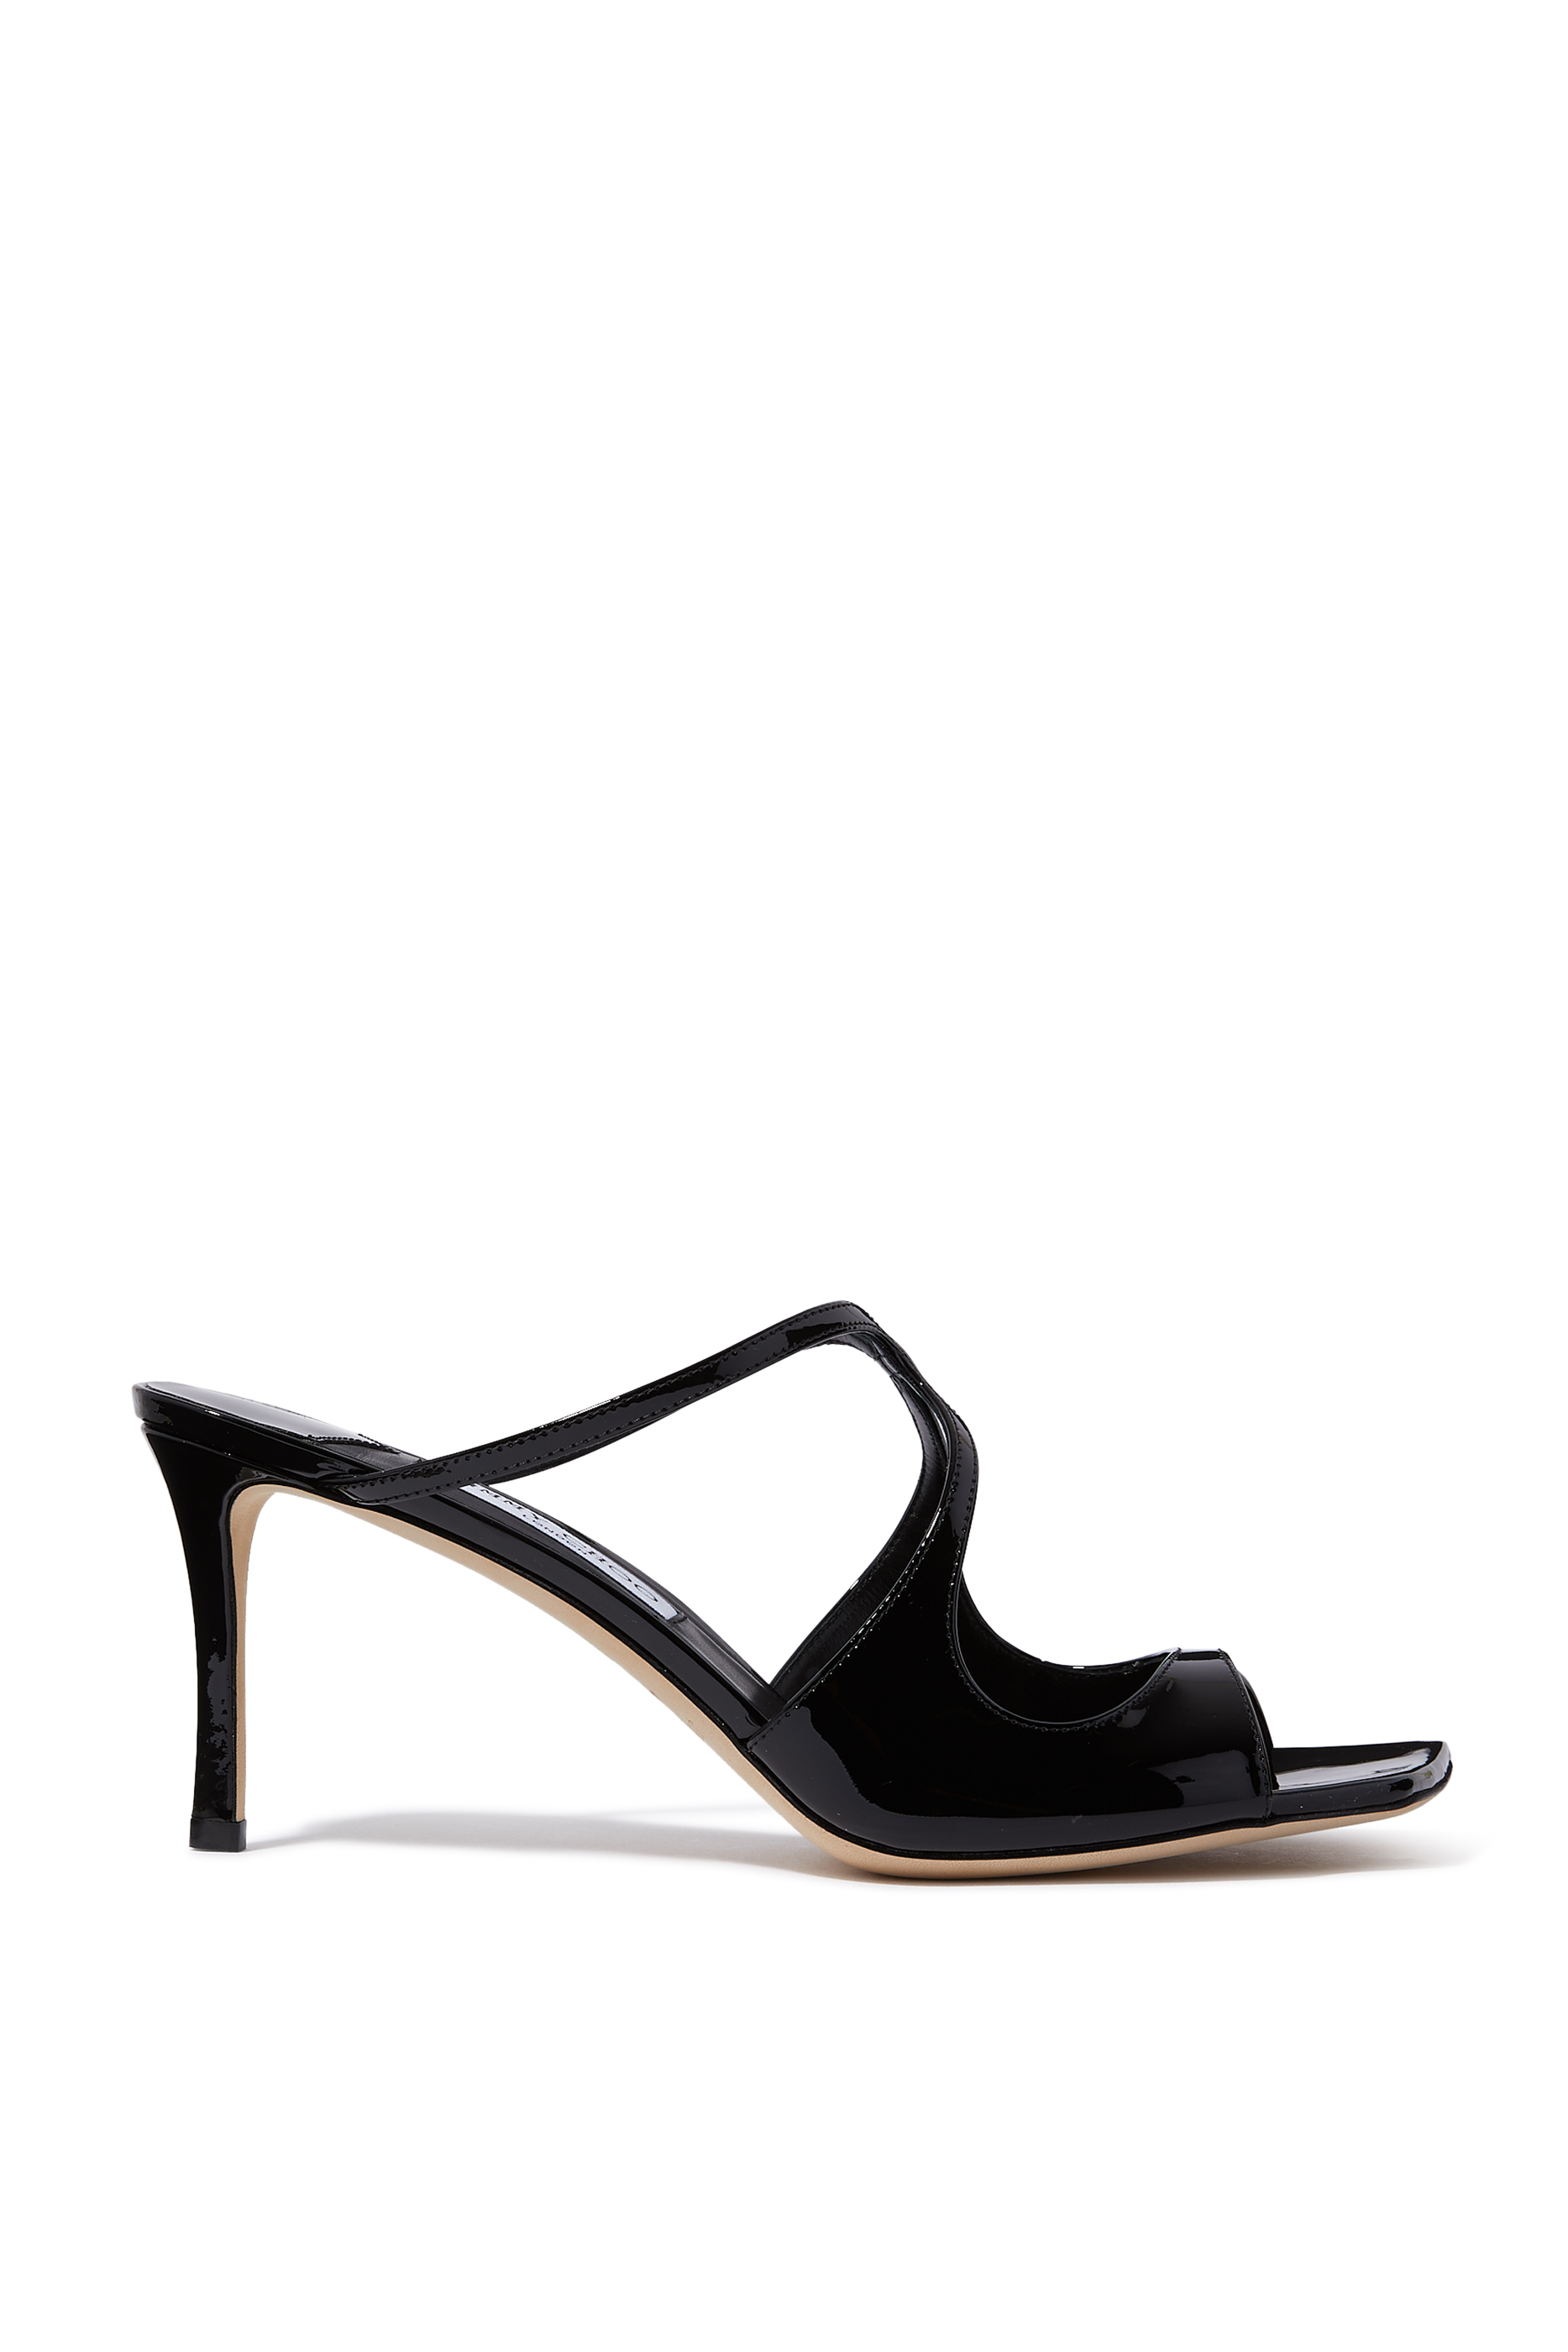 Buy Jimmy Choo Anise 75 Leather Sandals for Womens | Bloomingdale's Kuwait